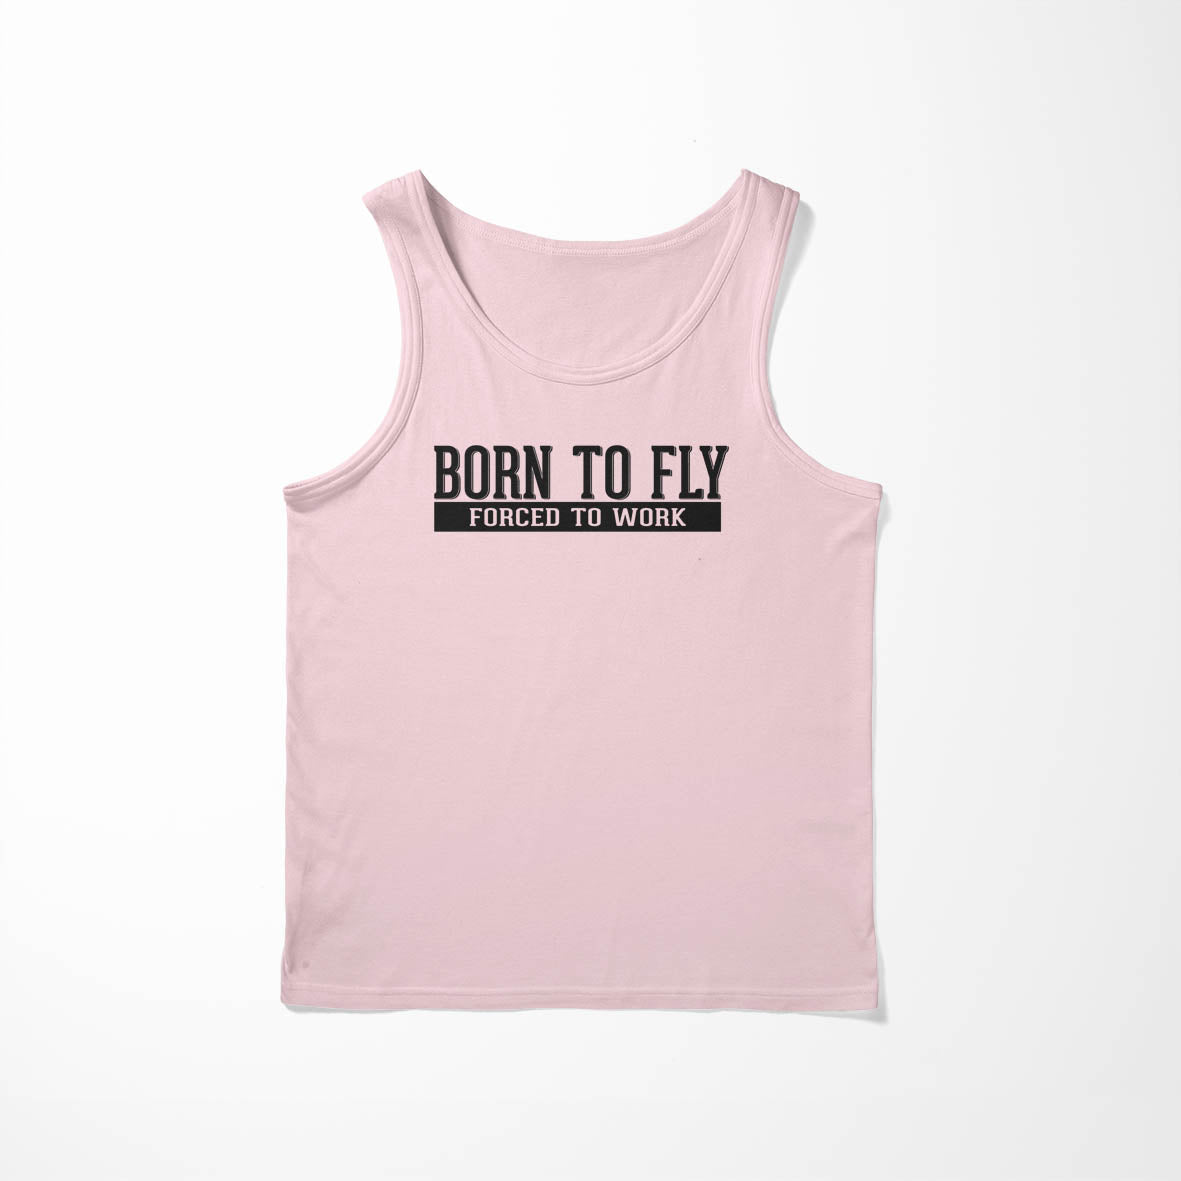 Born To Fly Forced To Work Designed Tank Tops